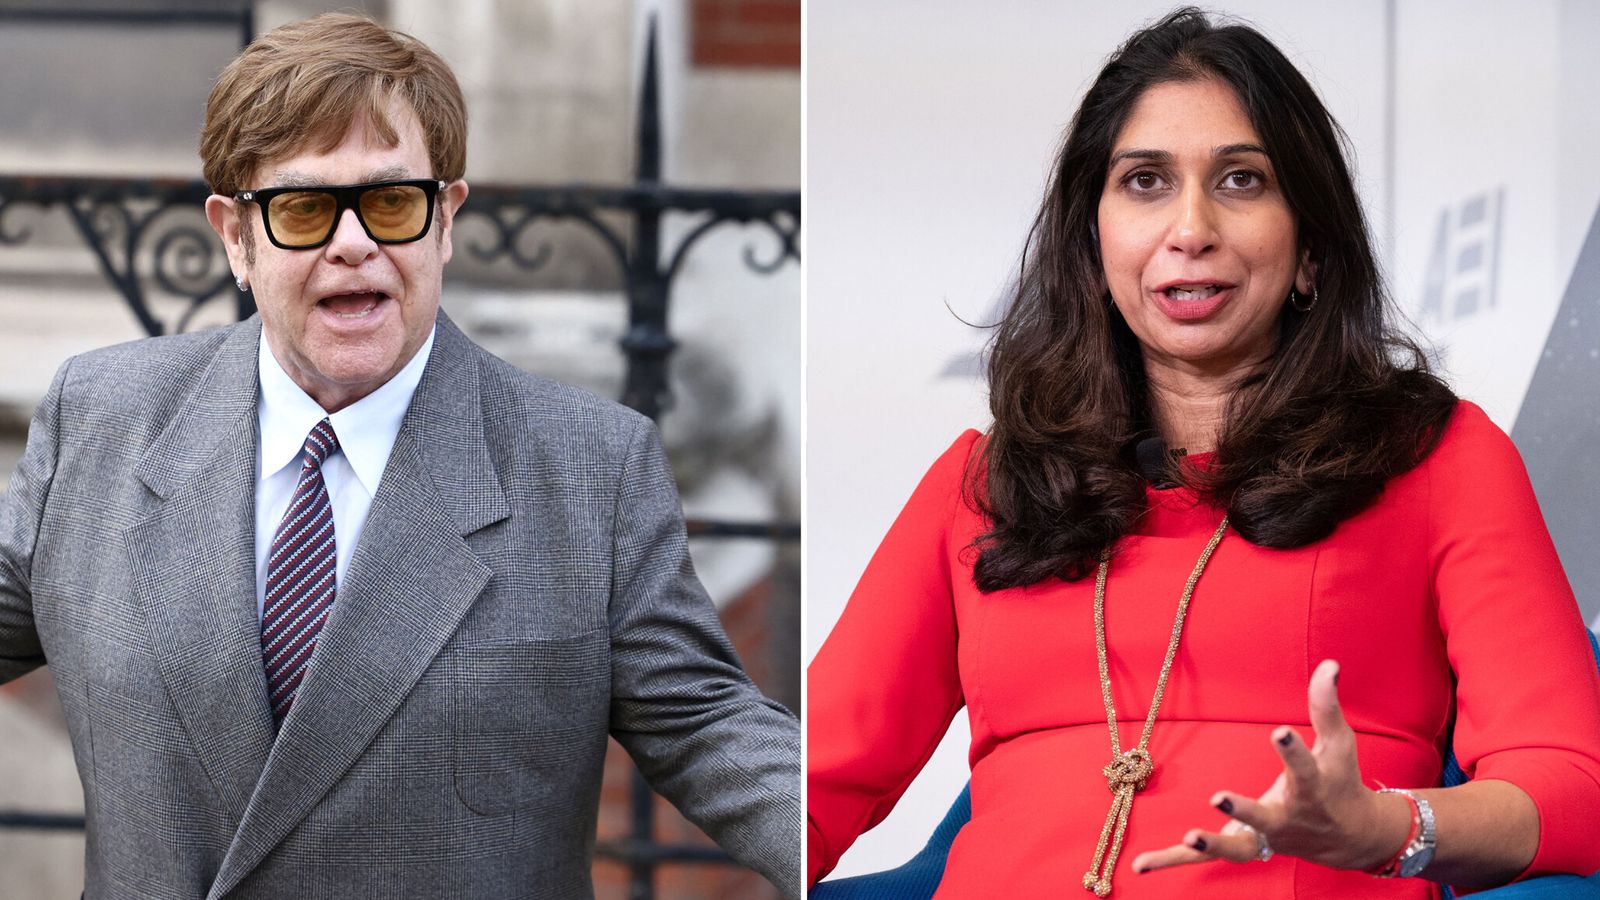 Suella Braverman hits back at Sir Elton John criticism of speech - as she brushes off claims she is aiming for Tory leadership